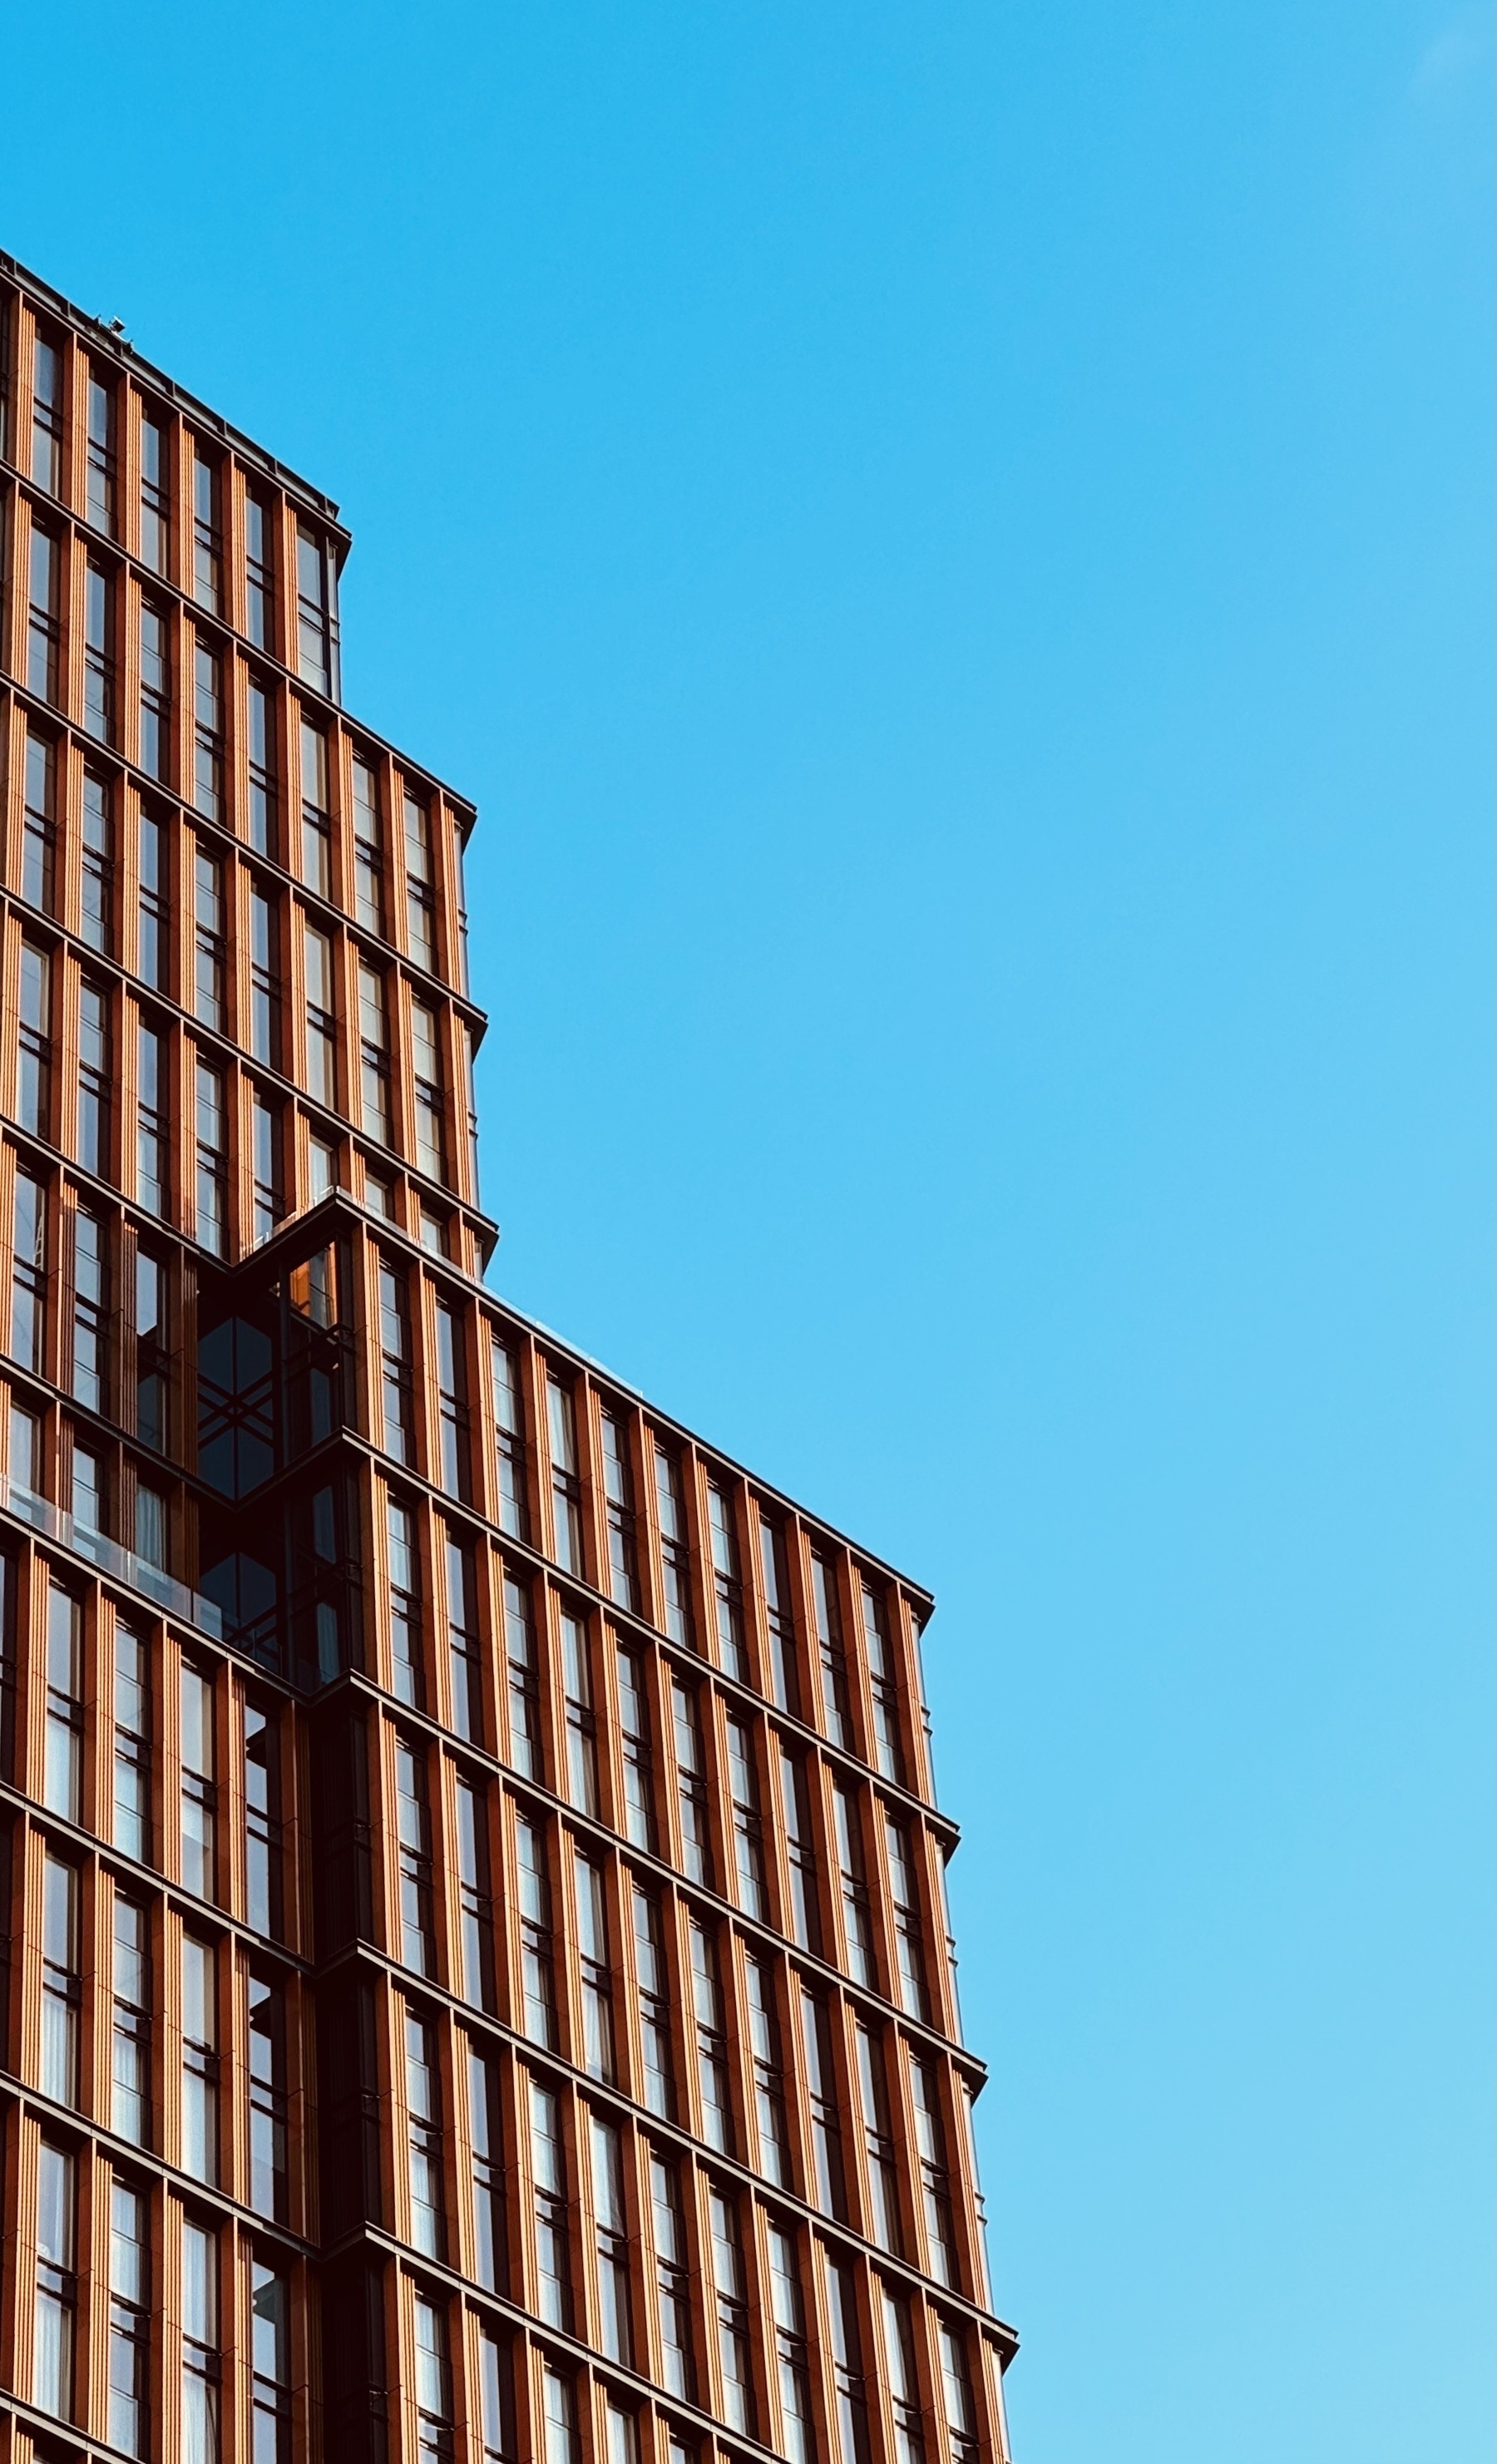 A copper clad building against the bright blue sky.